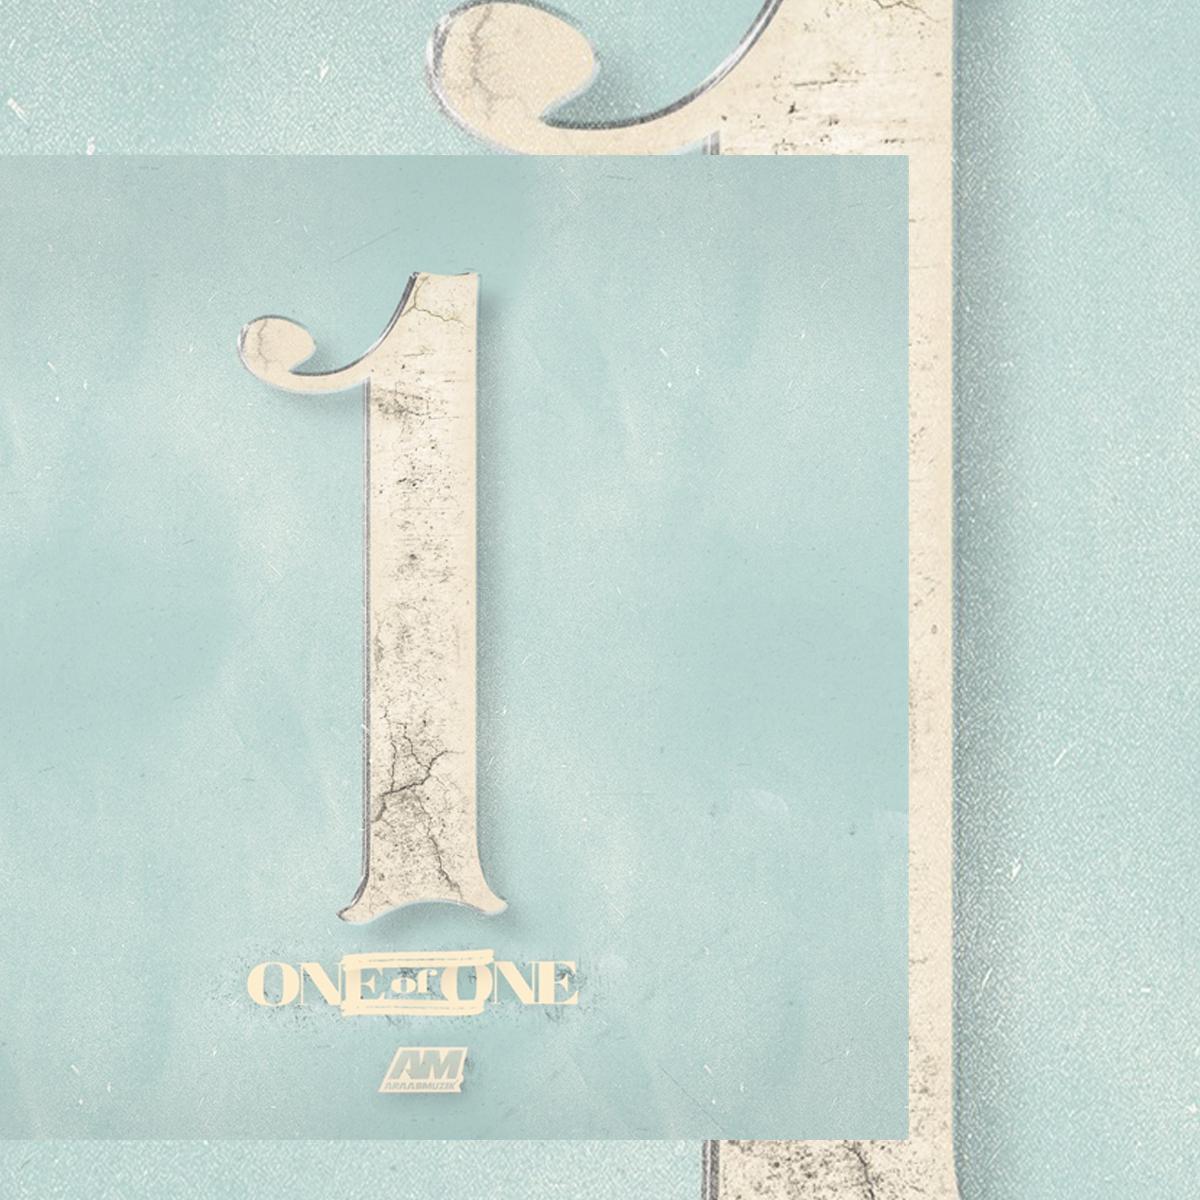 Cover of One of One